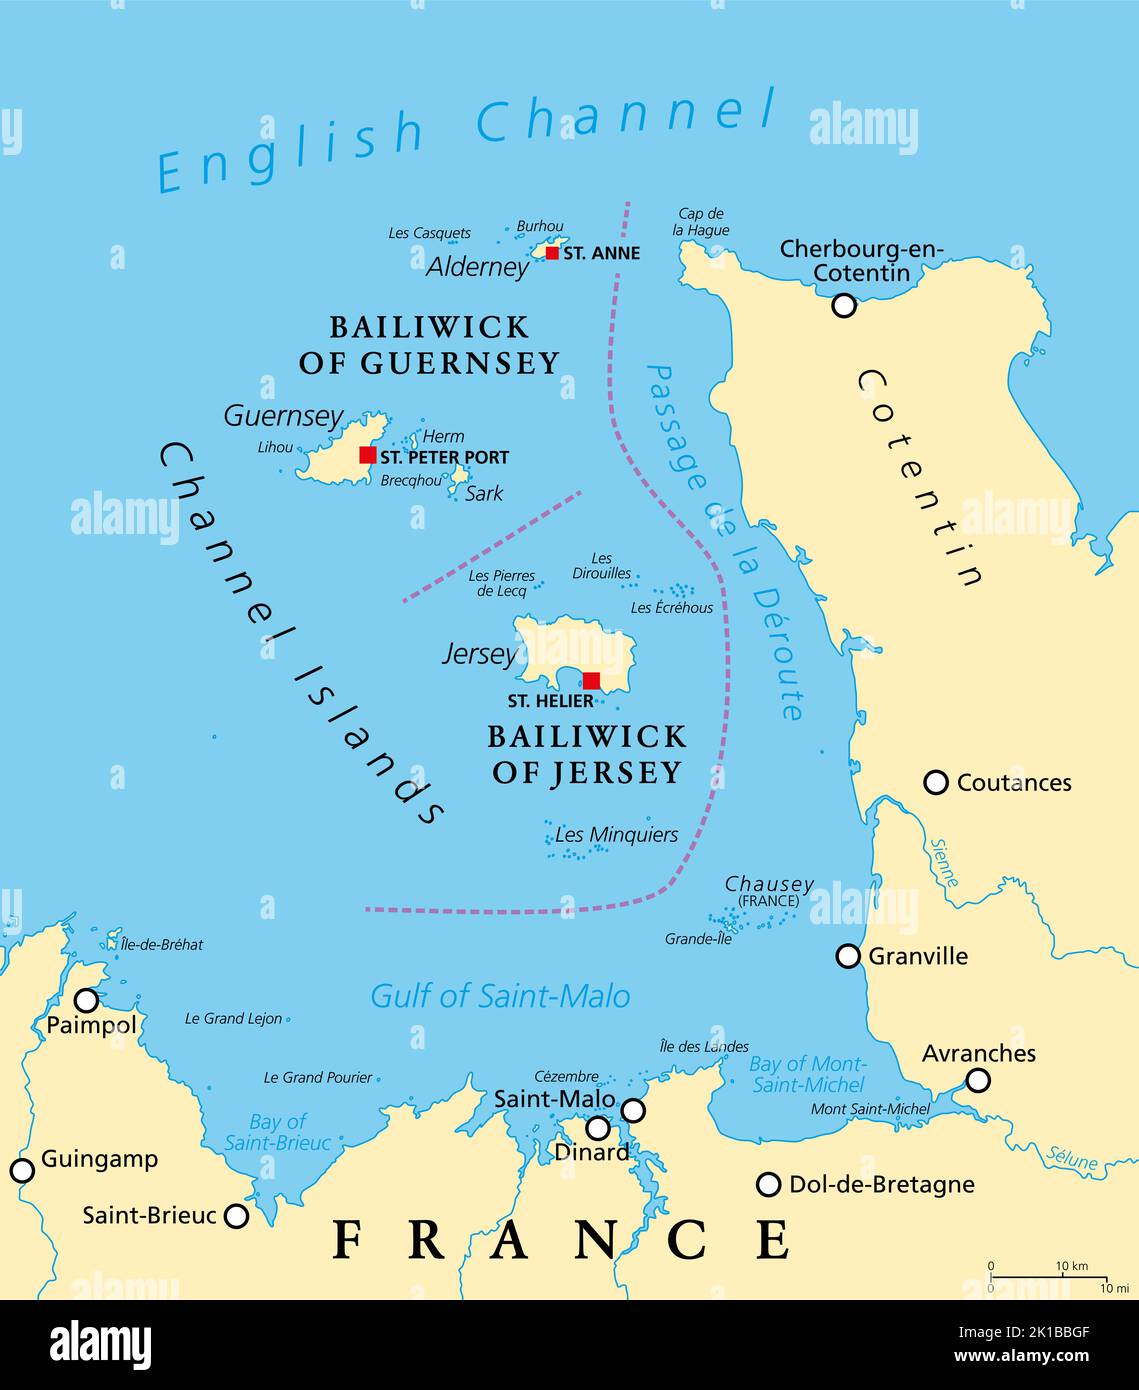 Channel Islands, political map. The Crown Dependencies Bailiwick of Guernsey and Bailiwick of Jersey, an archipelago in the English Channel. Stock Photo